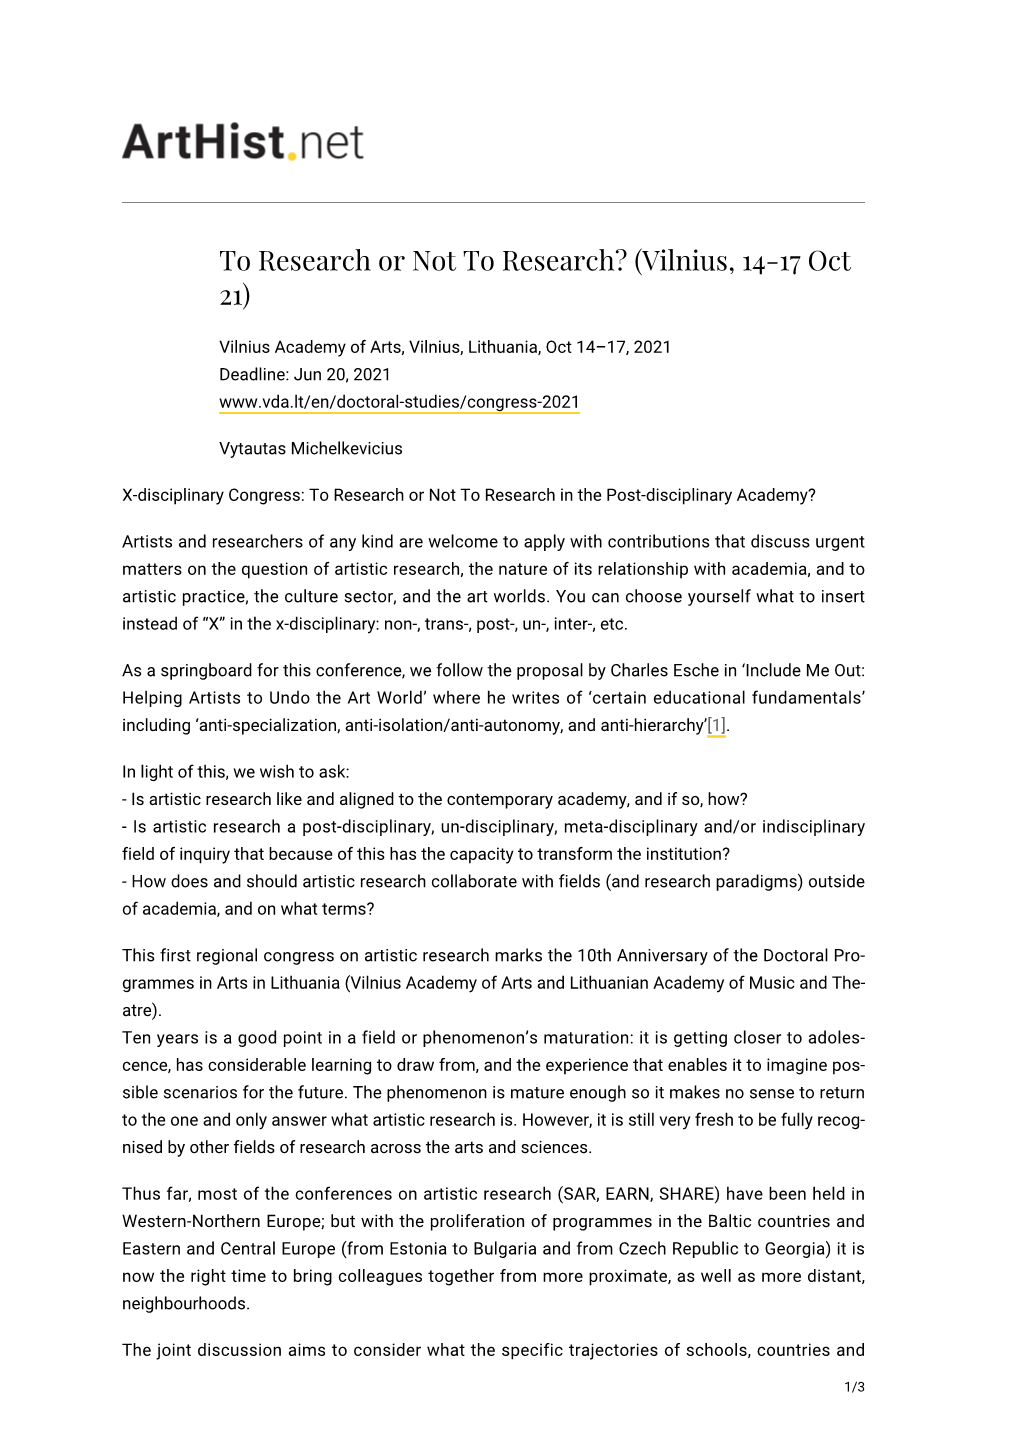 To Research Or Not to Research? (Vilnius, 14-17 Oct 21)